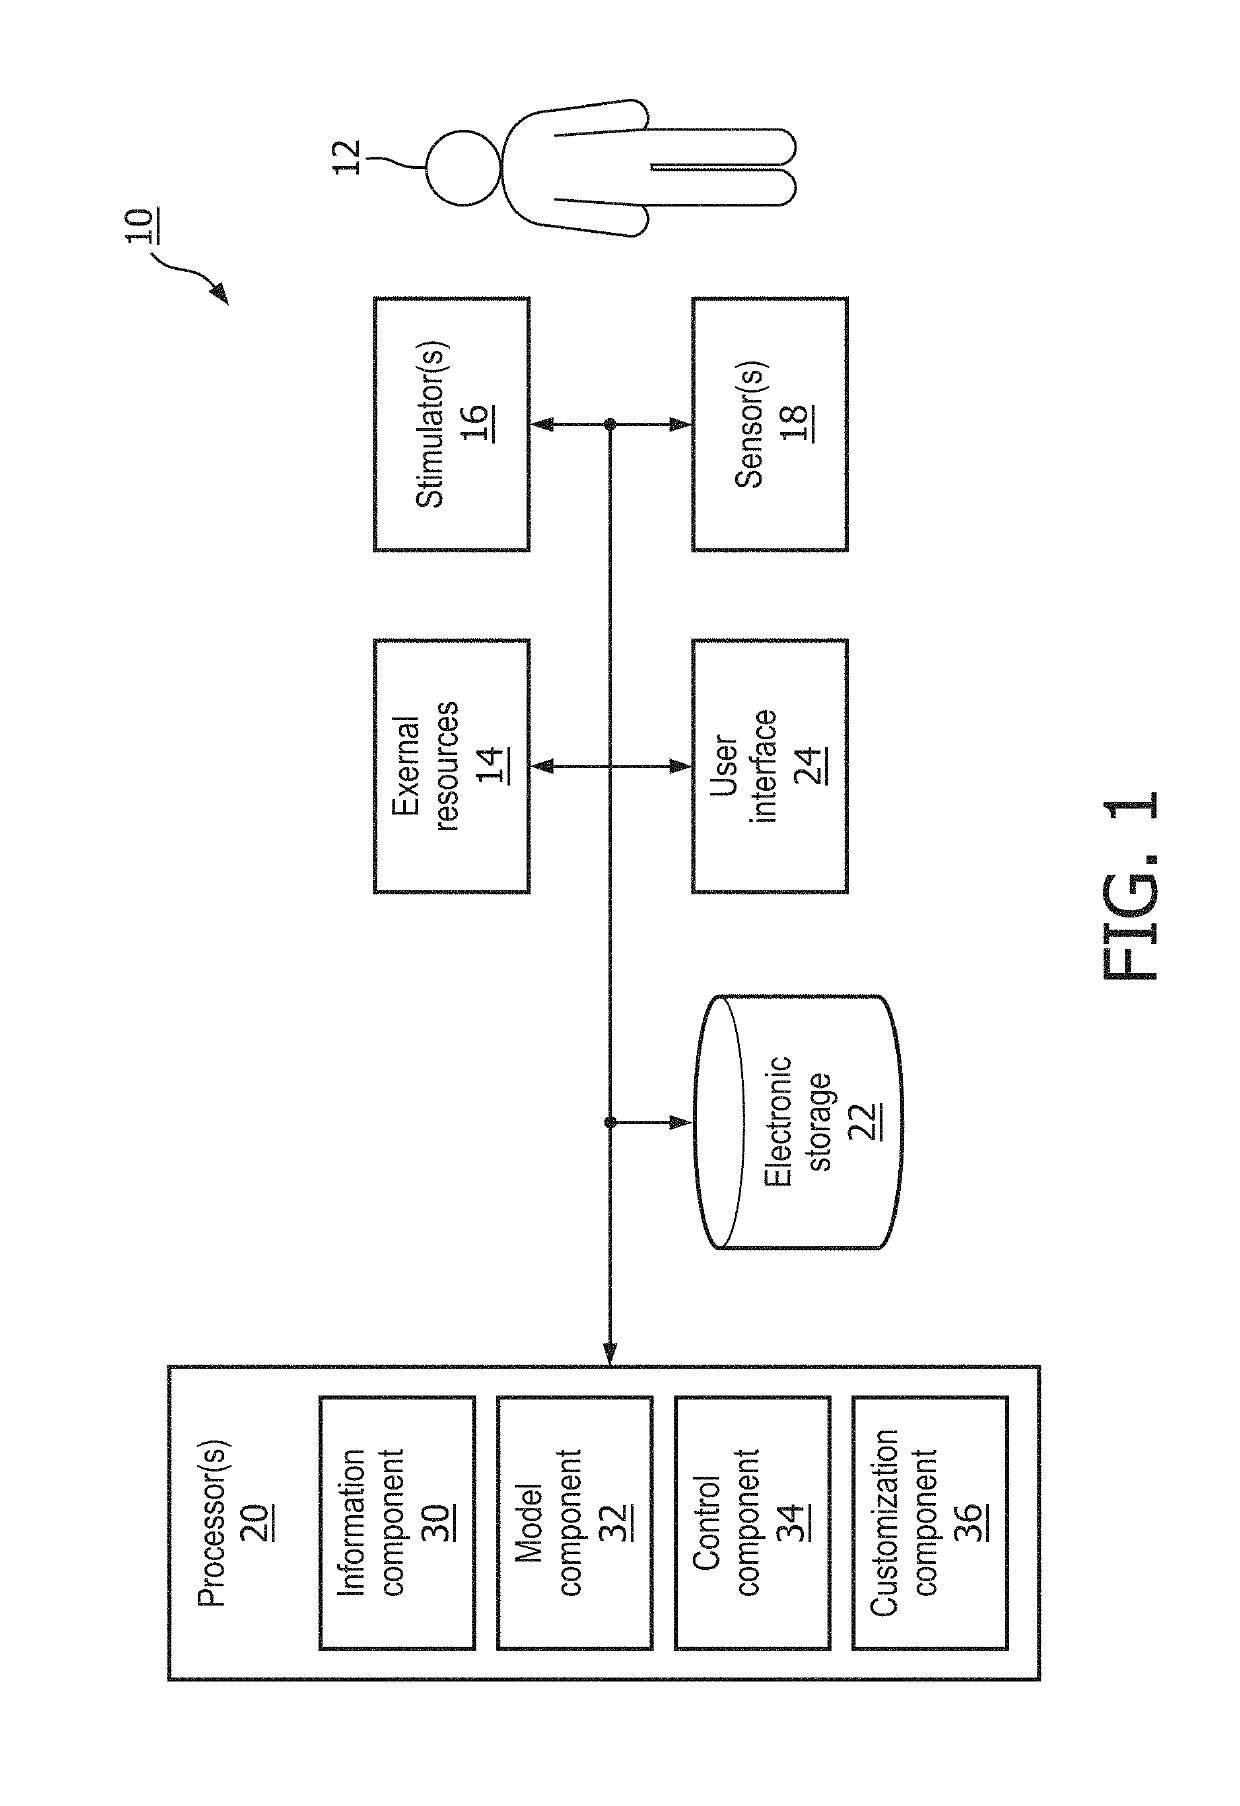 System and method for delivering sensory stimulation to a user based on a sleep architecture model